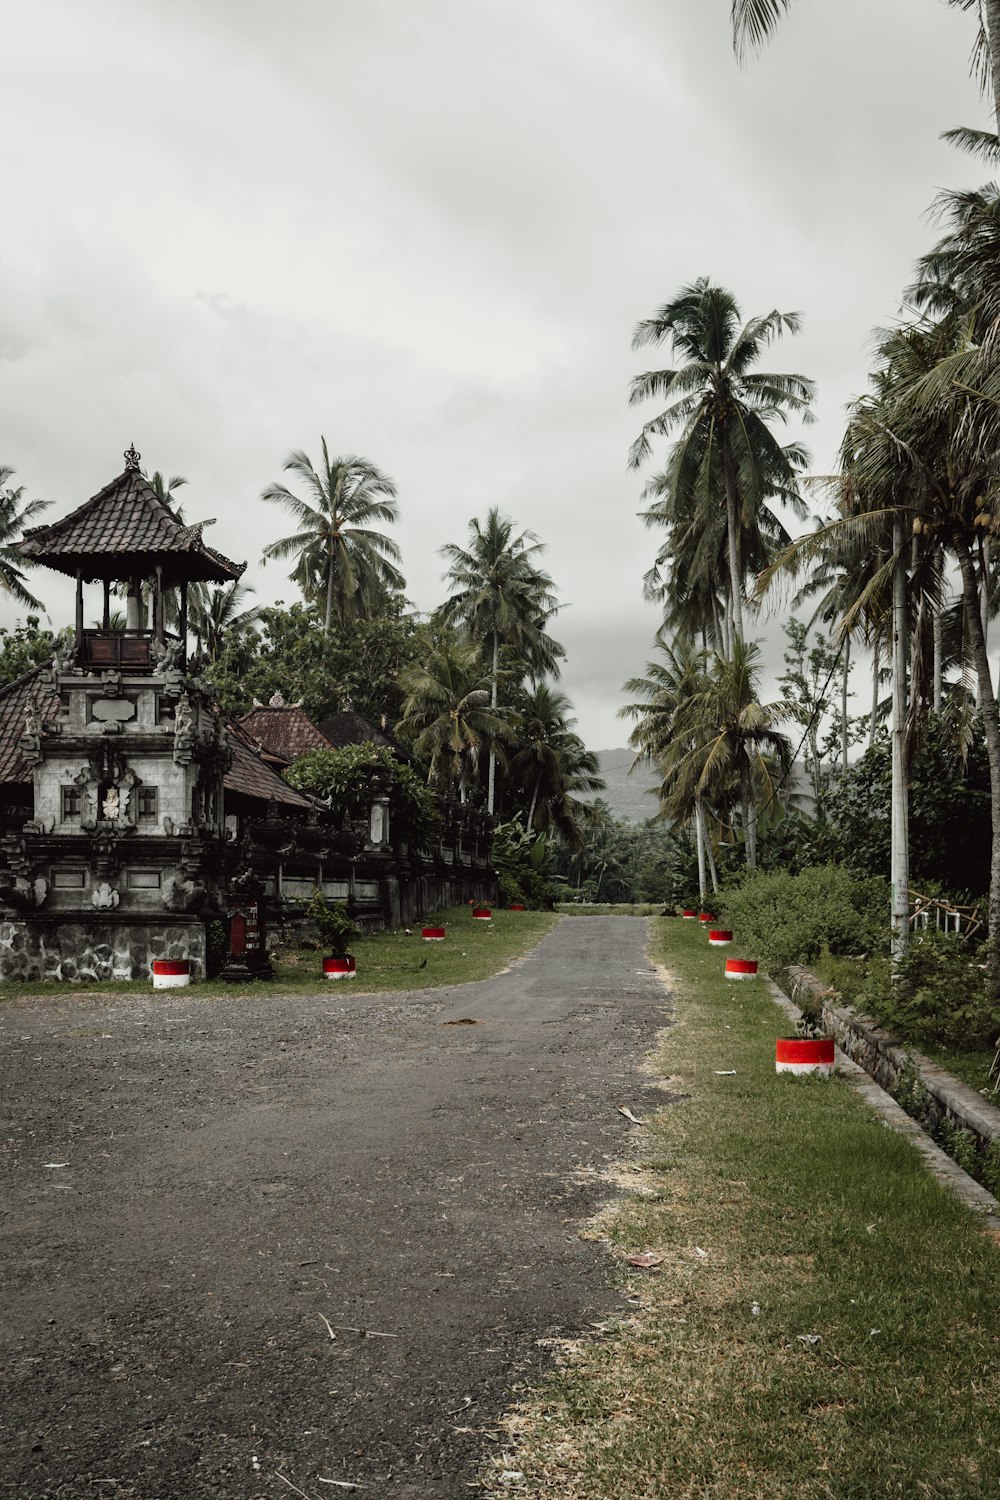 an old house in the middle of a road surrounded by palm trees